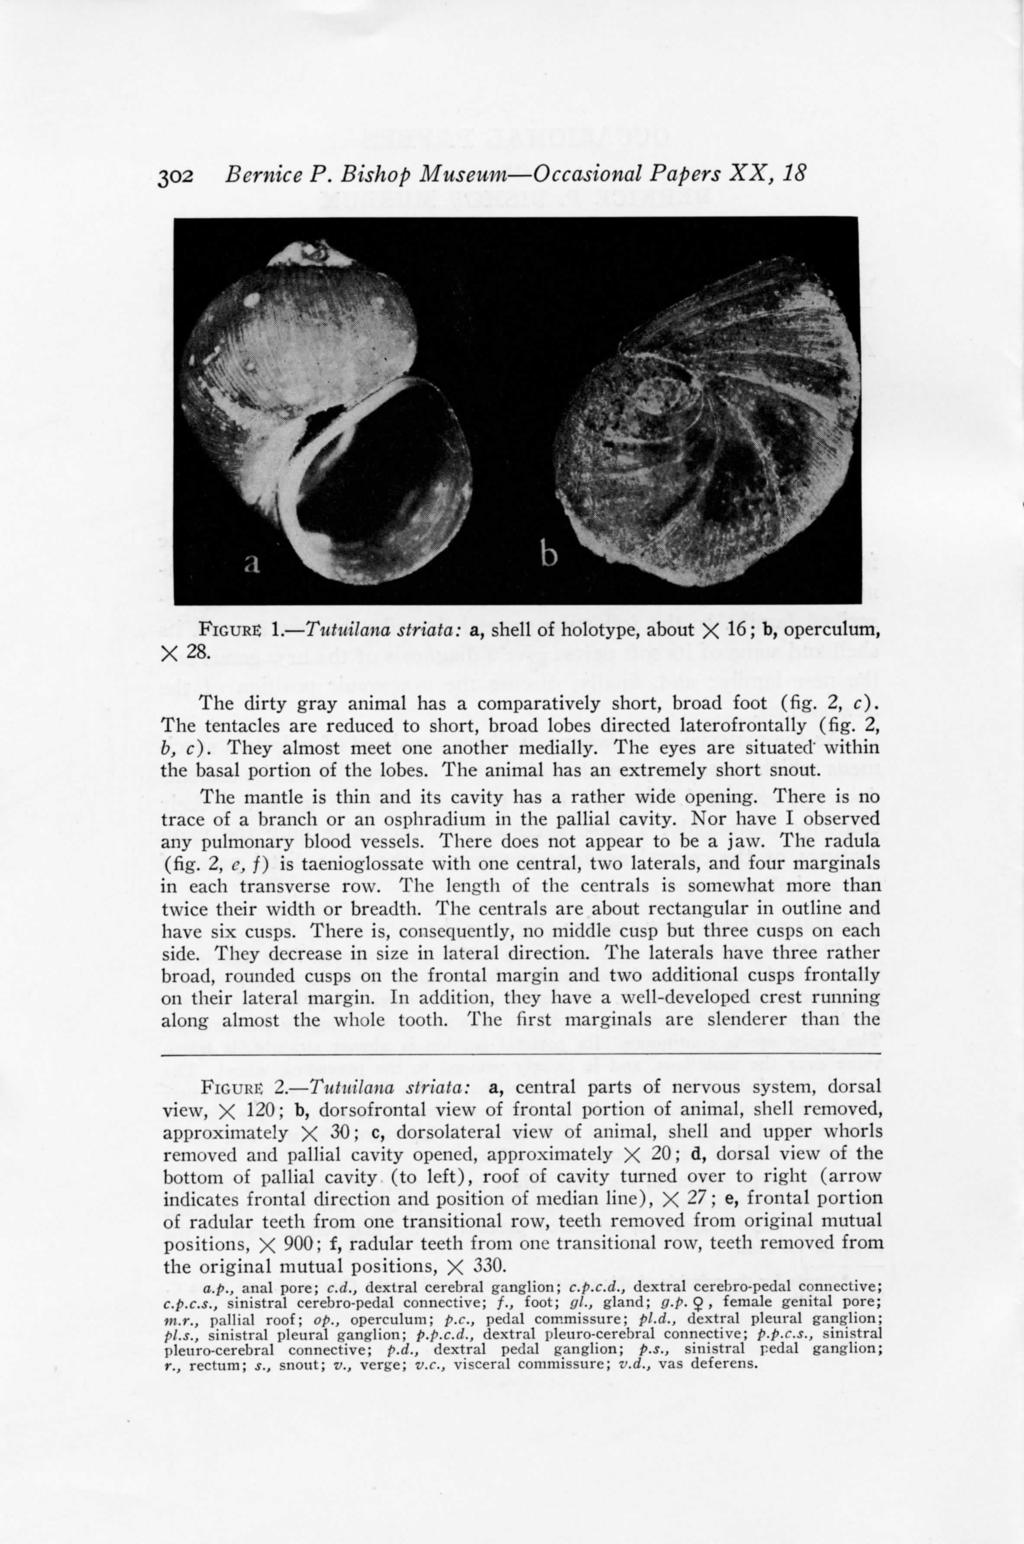 302 Bernice P. Bishop Museum Occasional Papers XX, 18 FIGURE 1. Tutuilana striata: a, shell of holotype, about X 16; b, operculum, X28.